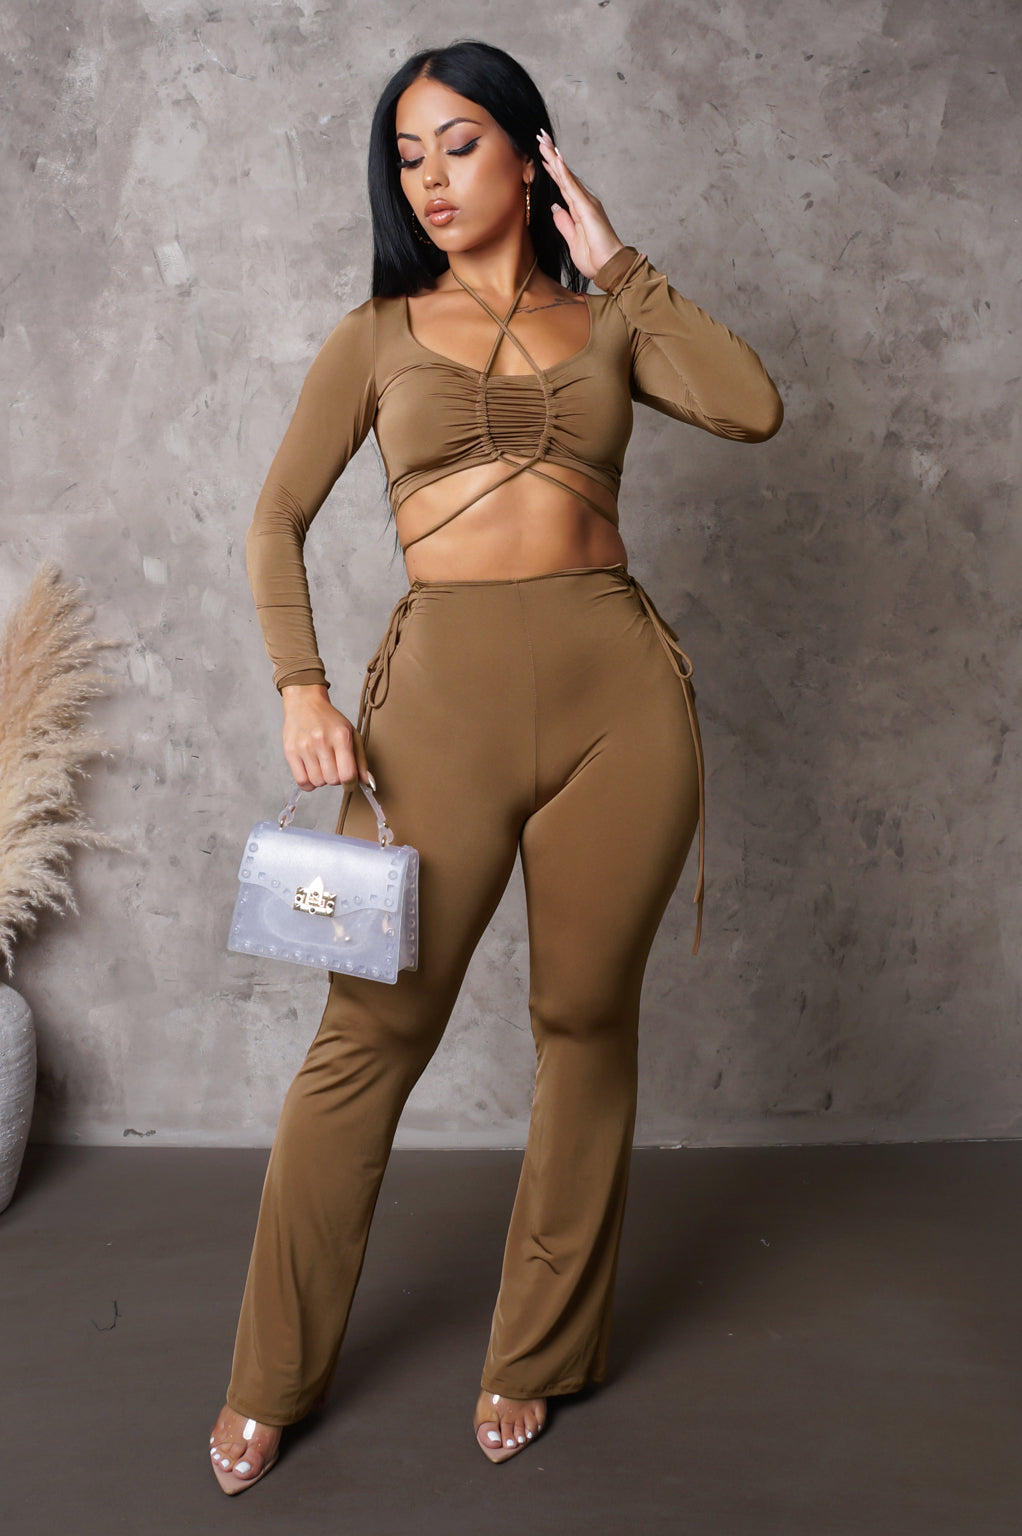 Load image into Gallery viewer, RESTOCK!! Girls Night Two Piece Pant Set - Caramel / Brown
